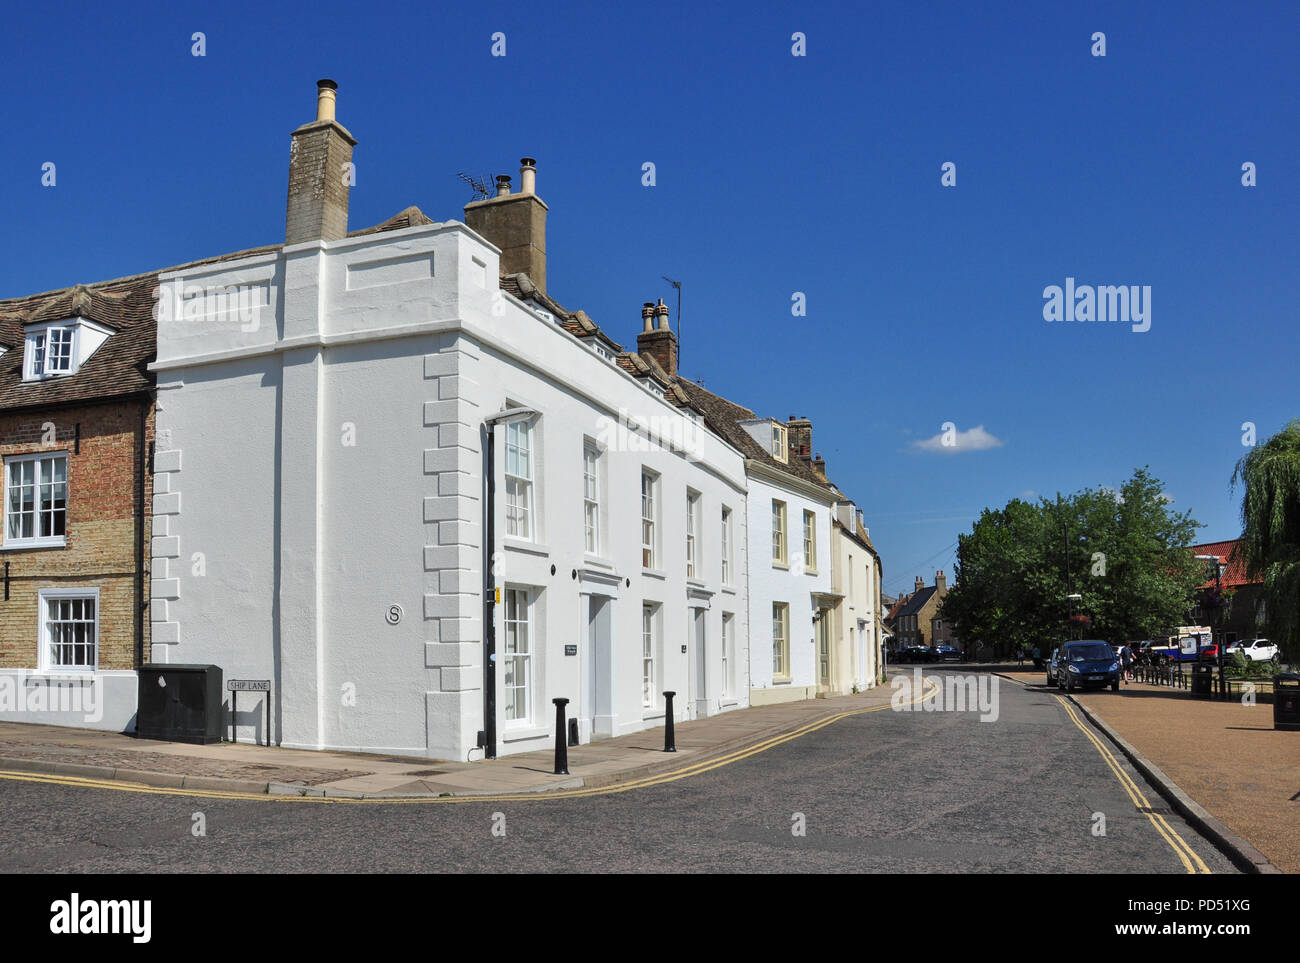 White residential properties near the river, Quayside, Ely, Cambridgeshire, England, UK Stock Photo